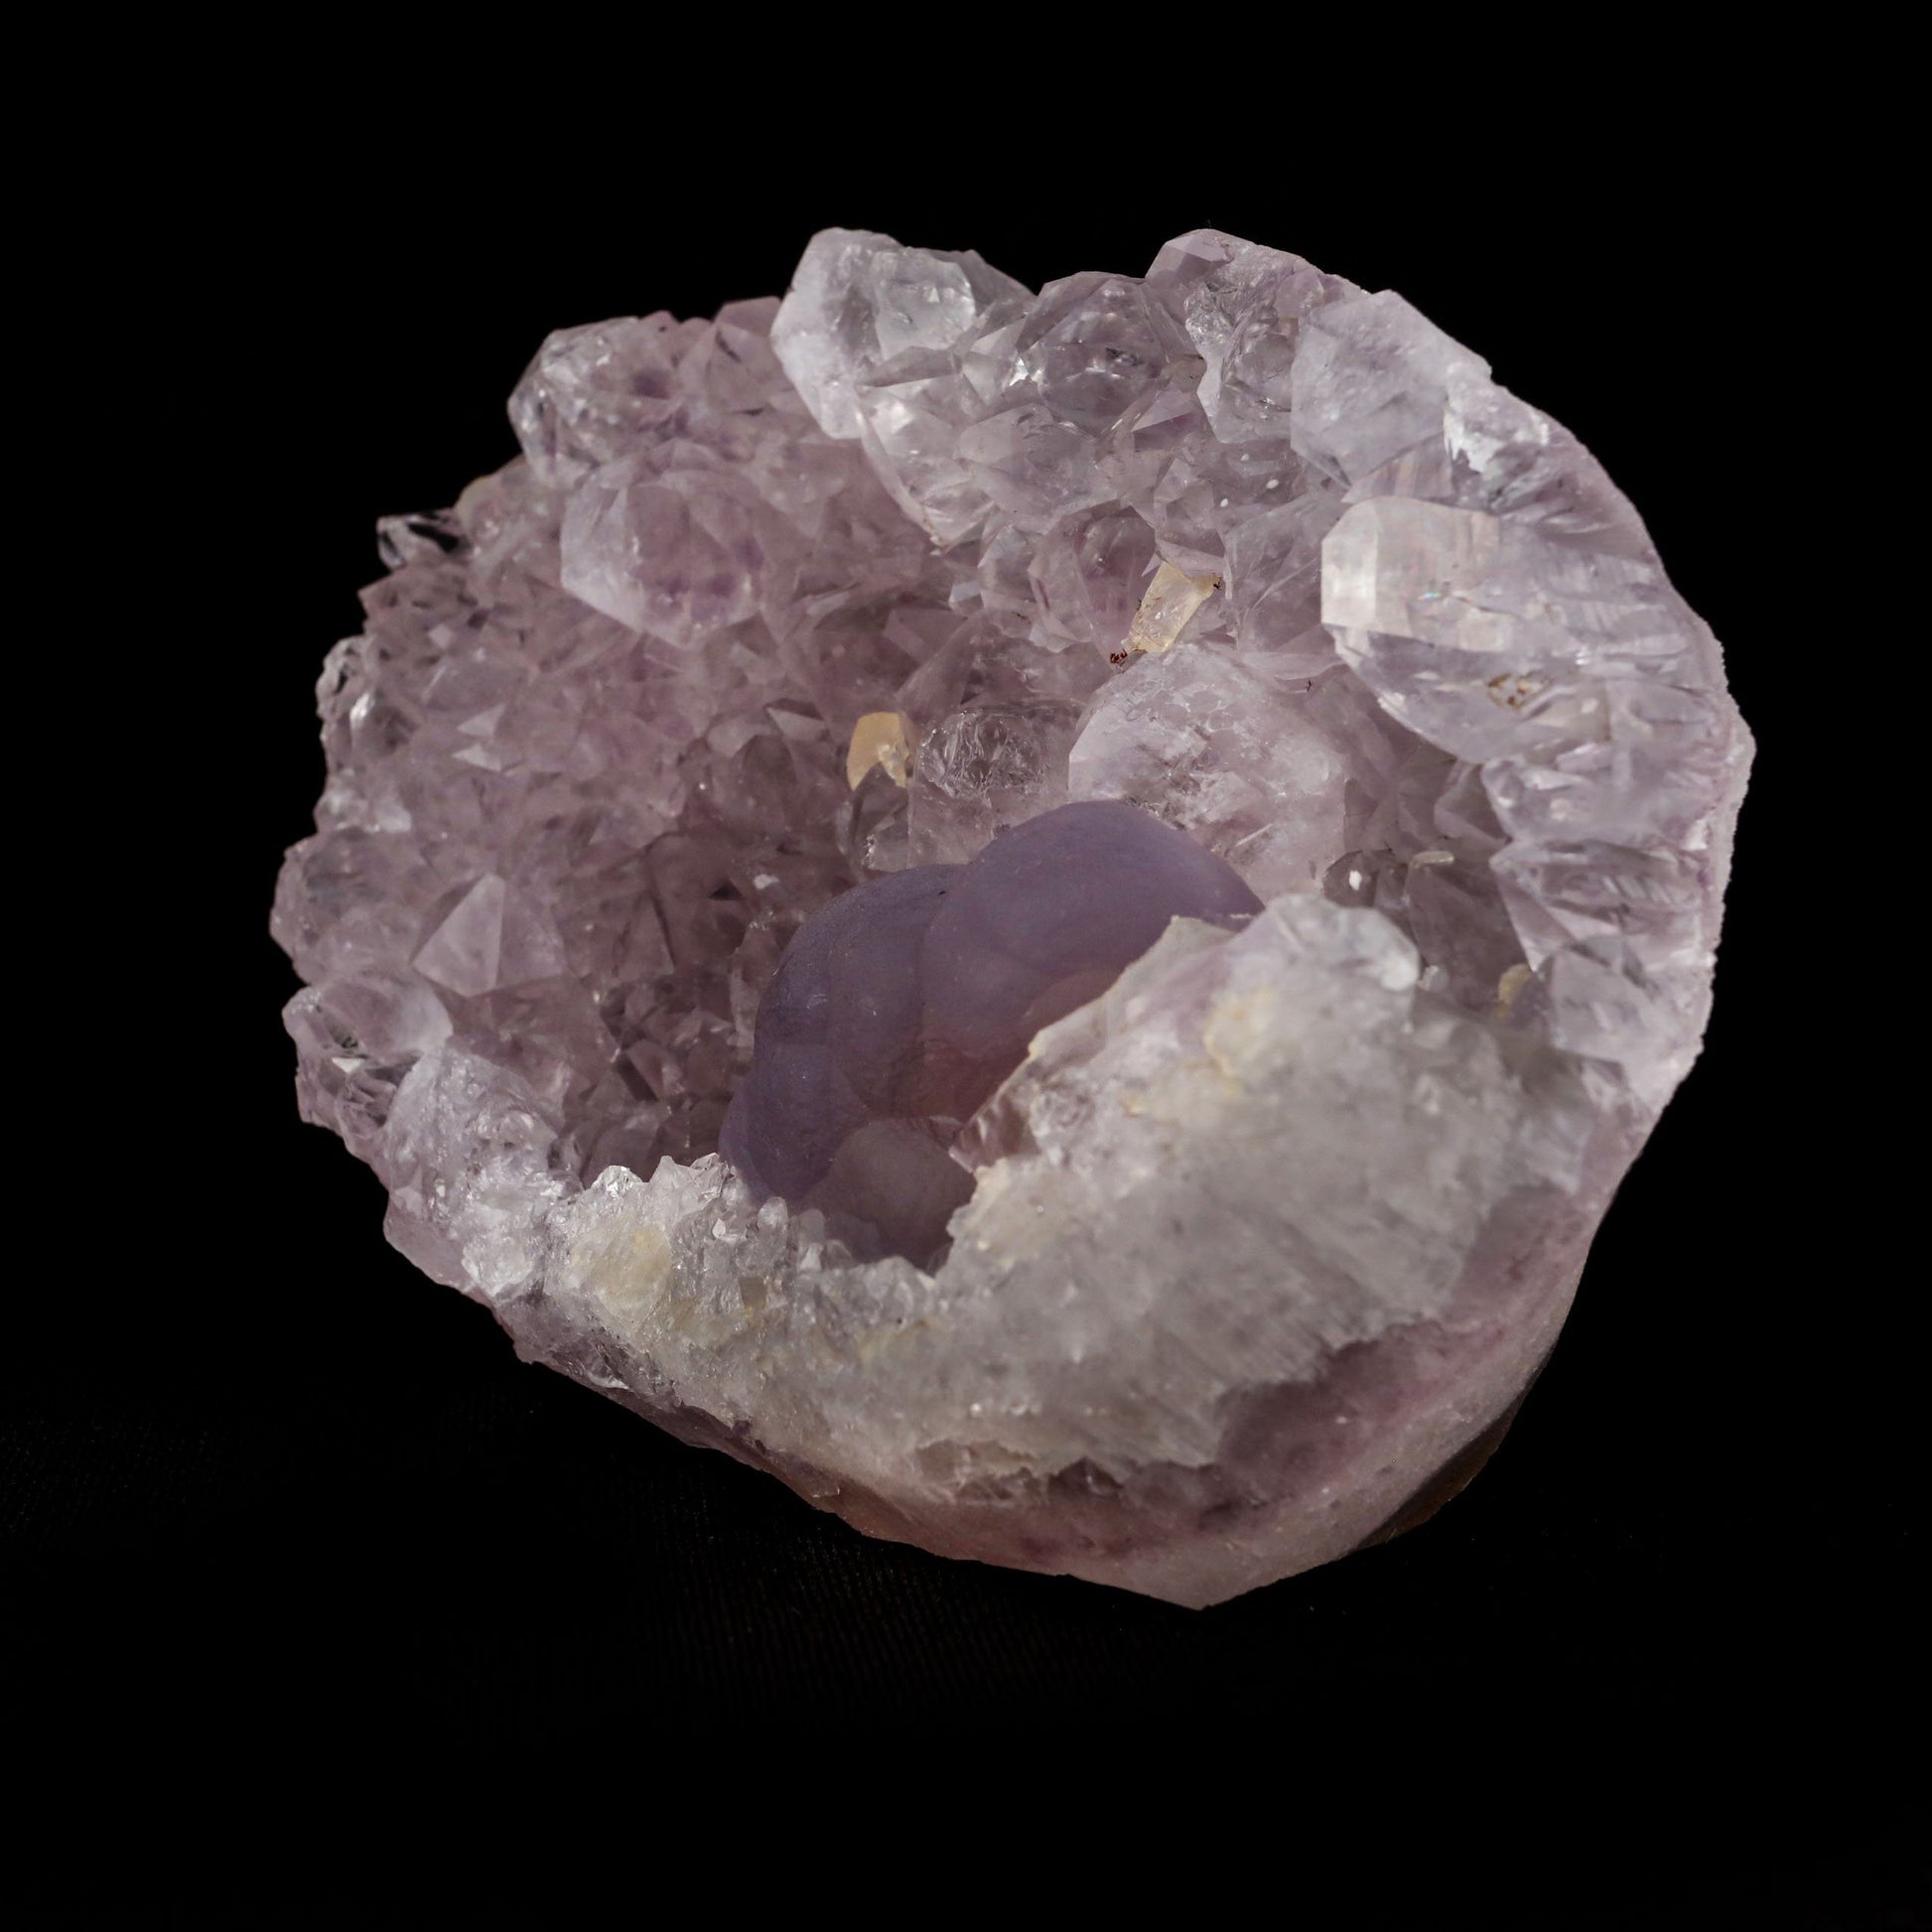 Blue Fluorite with Amethyst "Rare Find" Natural Mineral Specimen # B …  https://www.superbminerals.us/products/blue-fluorite-with-amethyst-rare-find-natural-mineral-specimen-b-4969  Features:This is a superb and unique piece featuring a large, complete and perfect spherical (botryoidal) formation of highly translucent blue colored Fluorite on a plate of lustrous amethyst. blue Fluorite spheres of this quality 